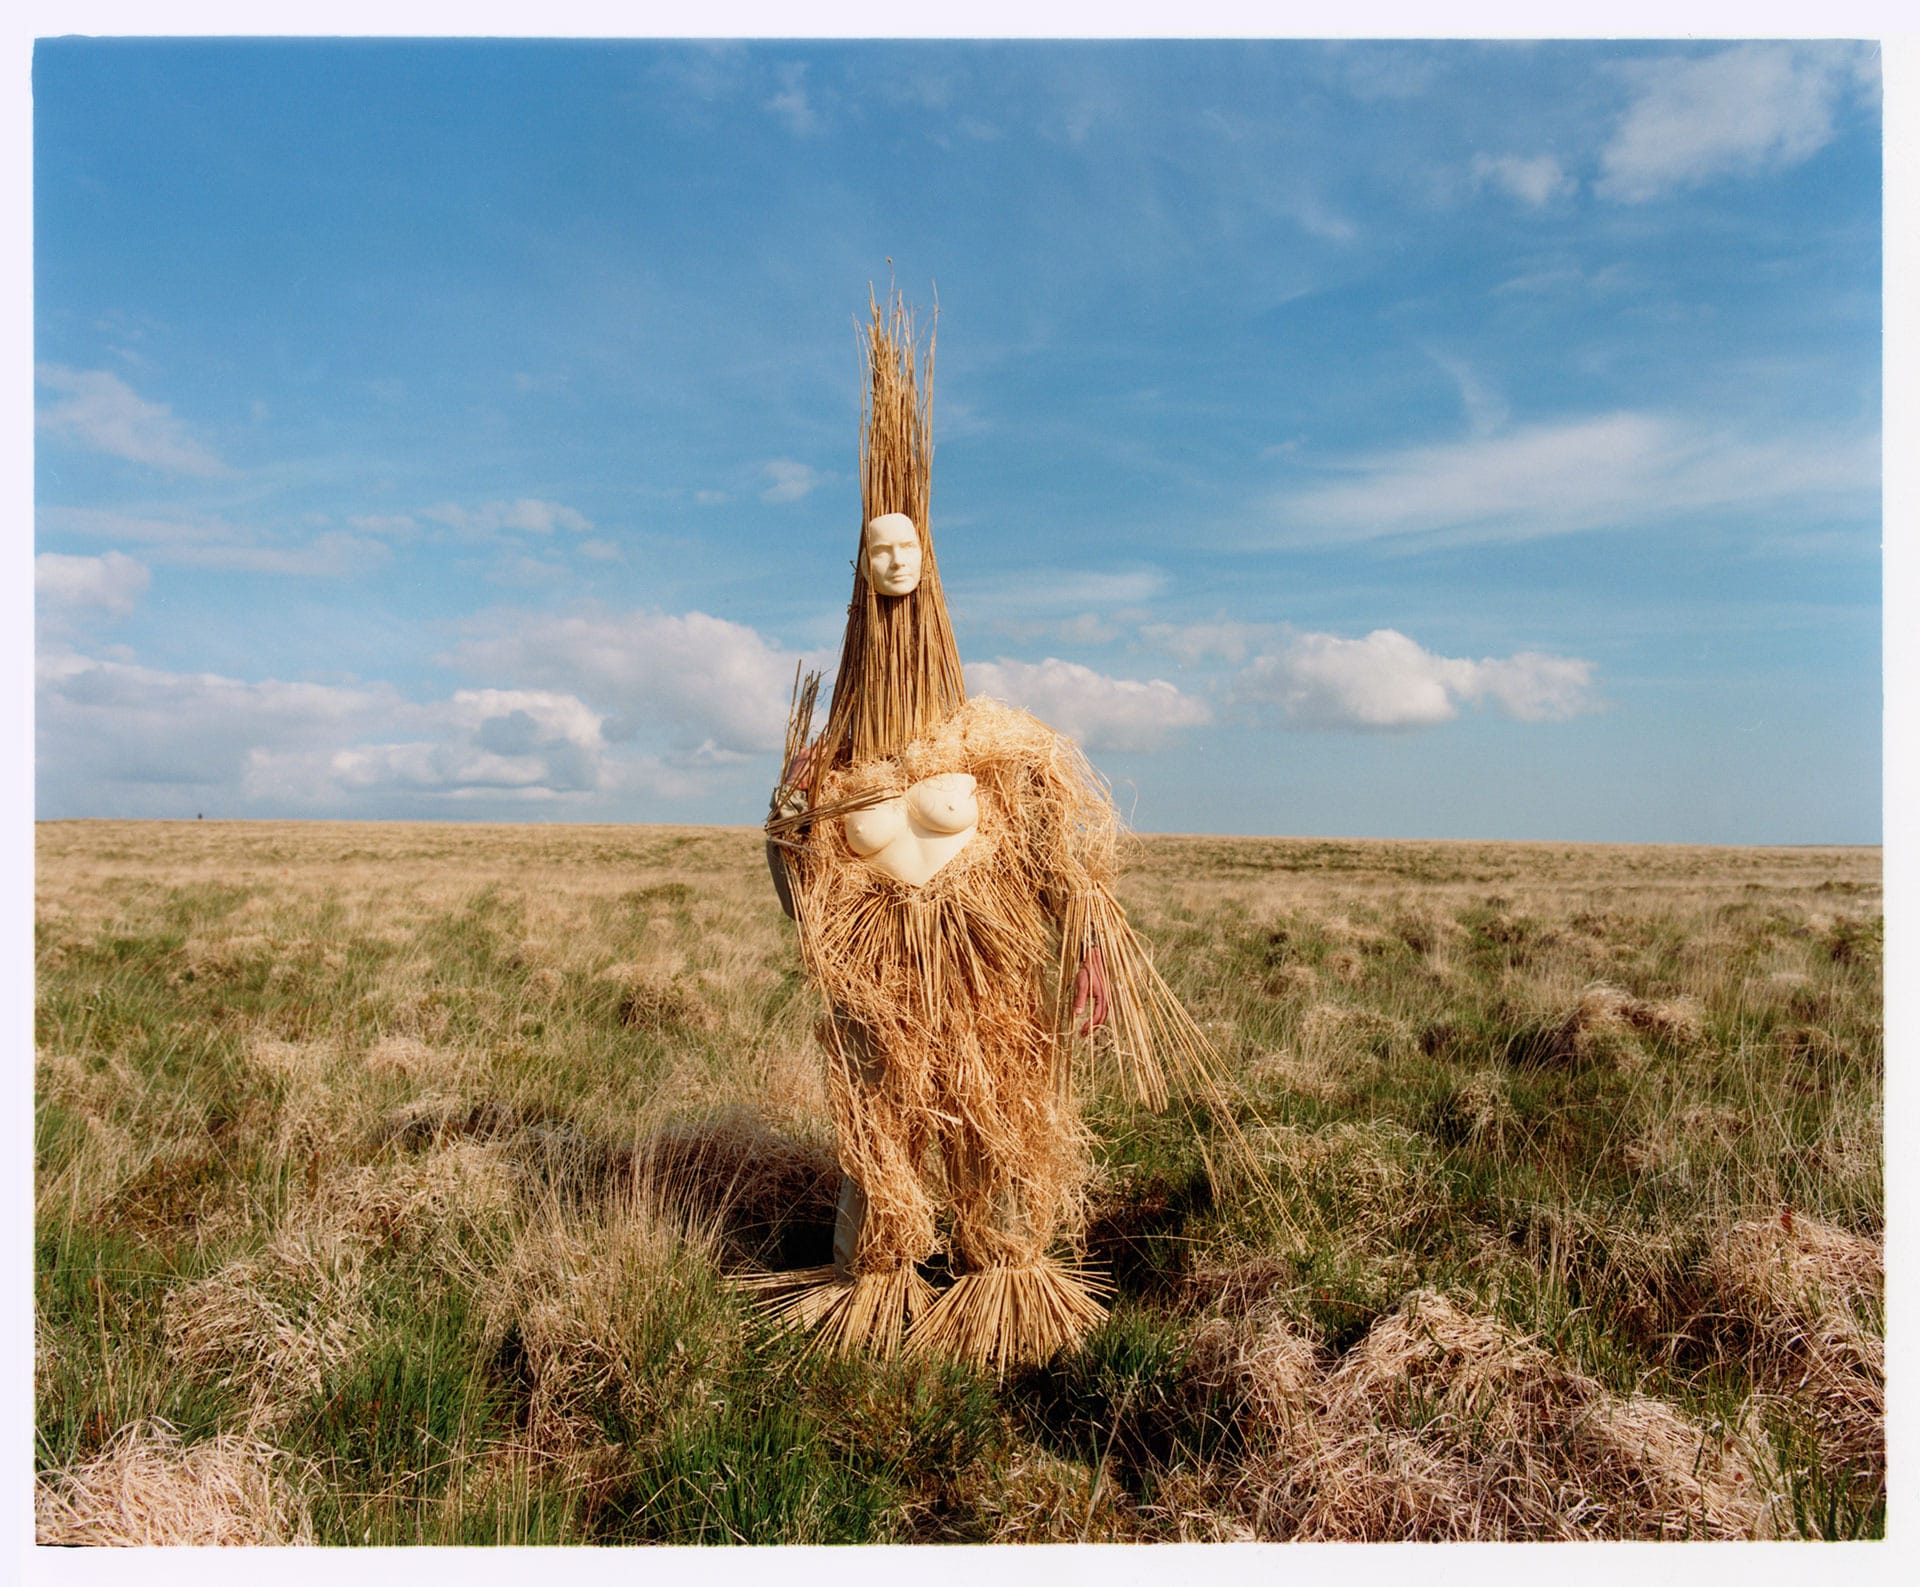 A lone figure of straw and masquerade standing in a rural landscape